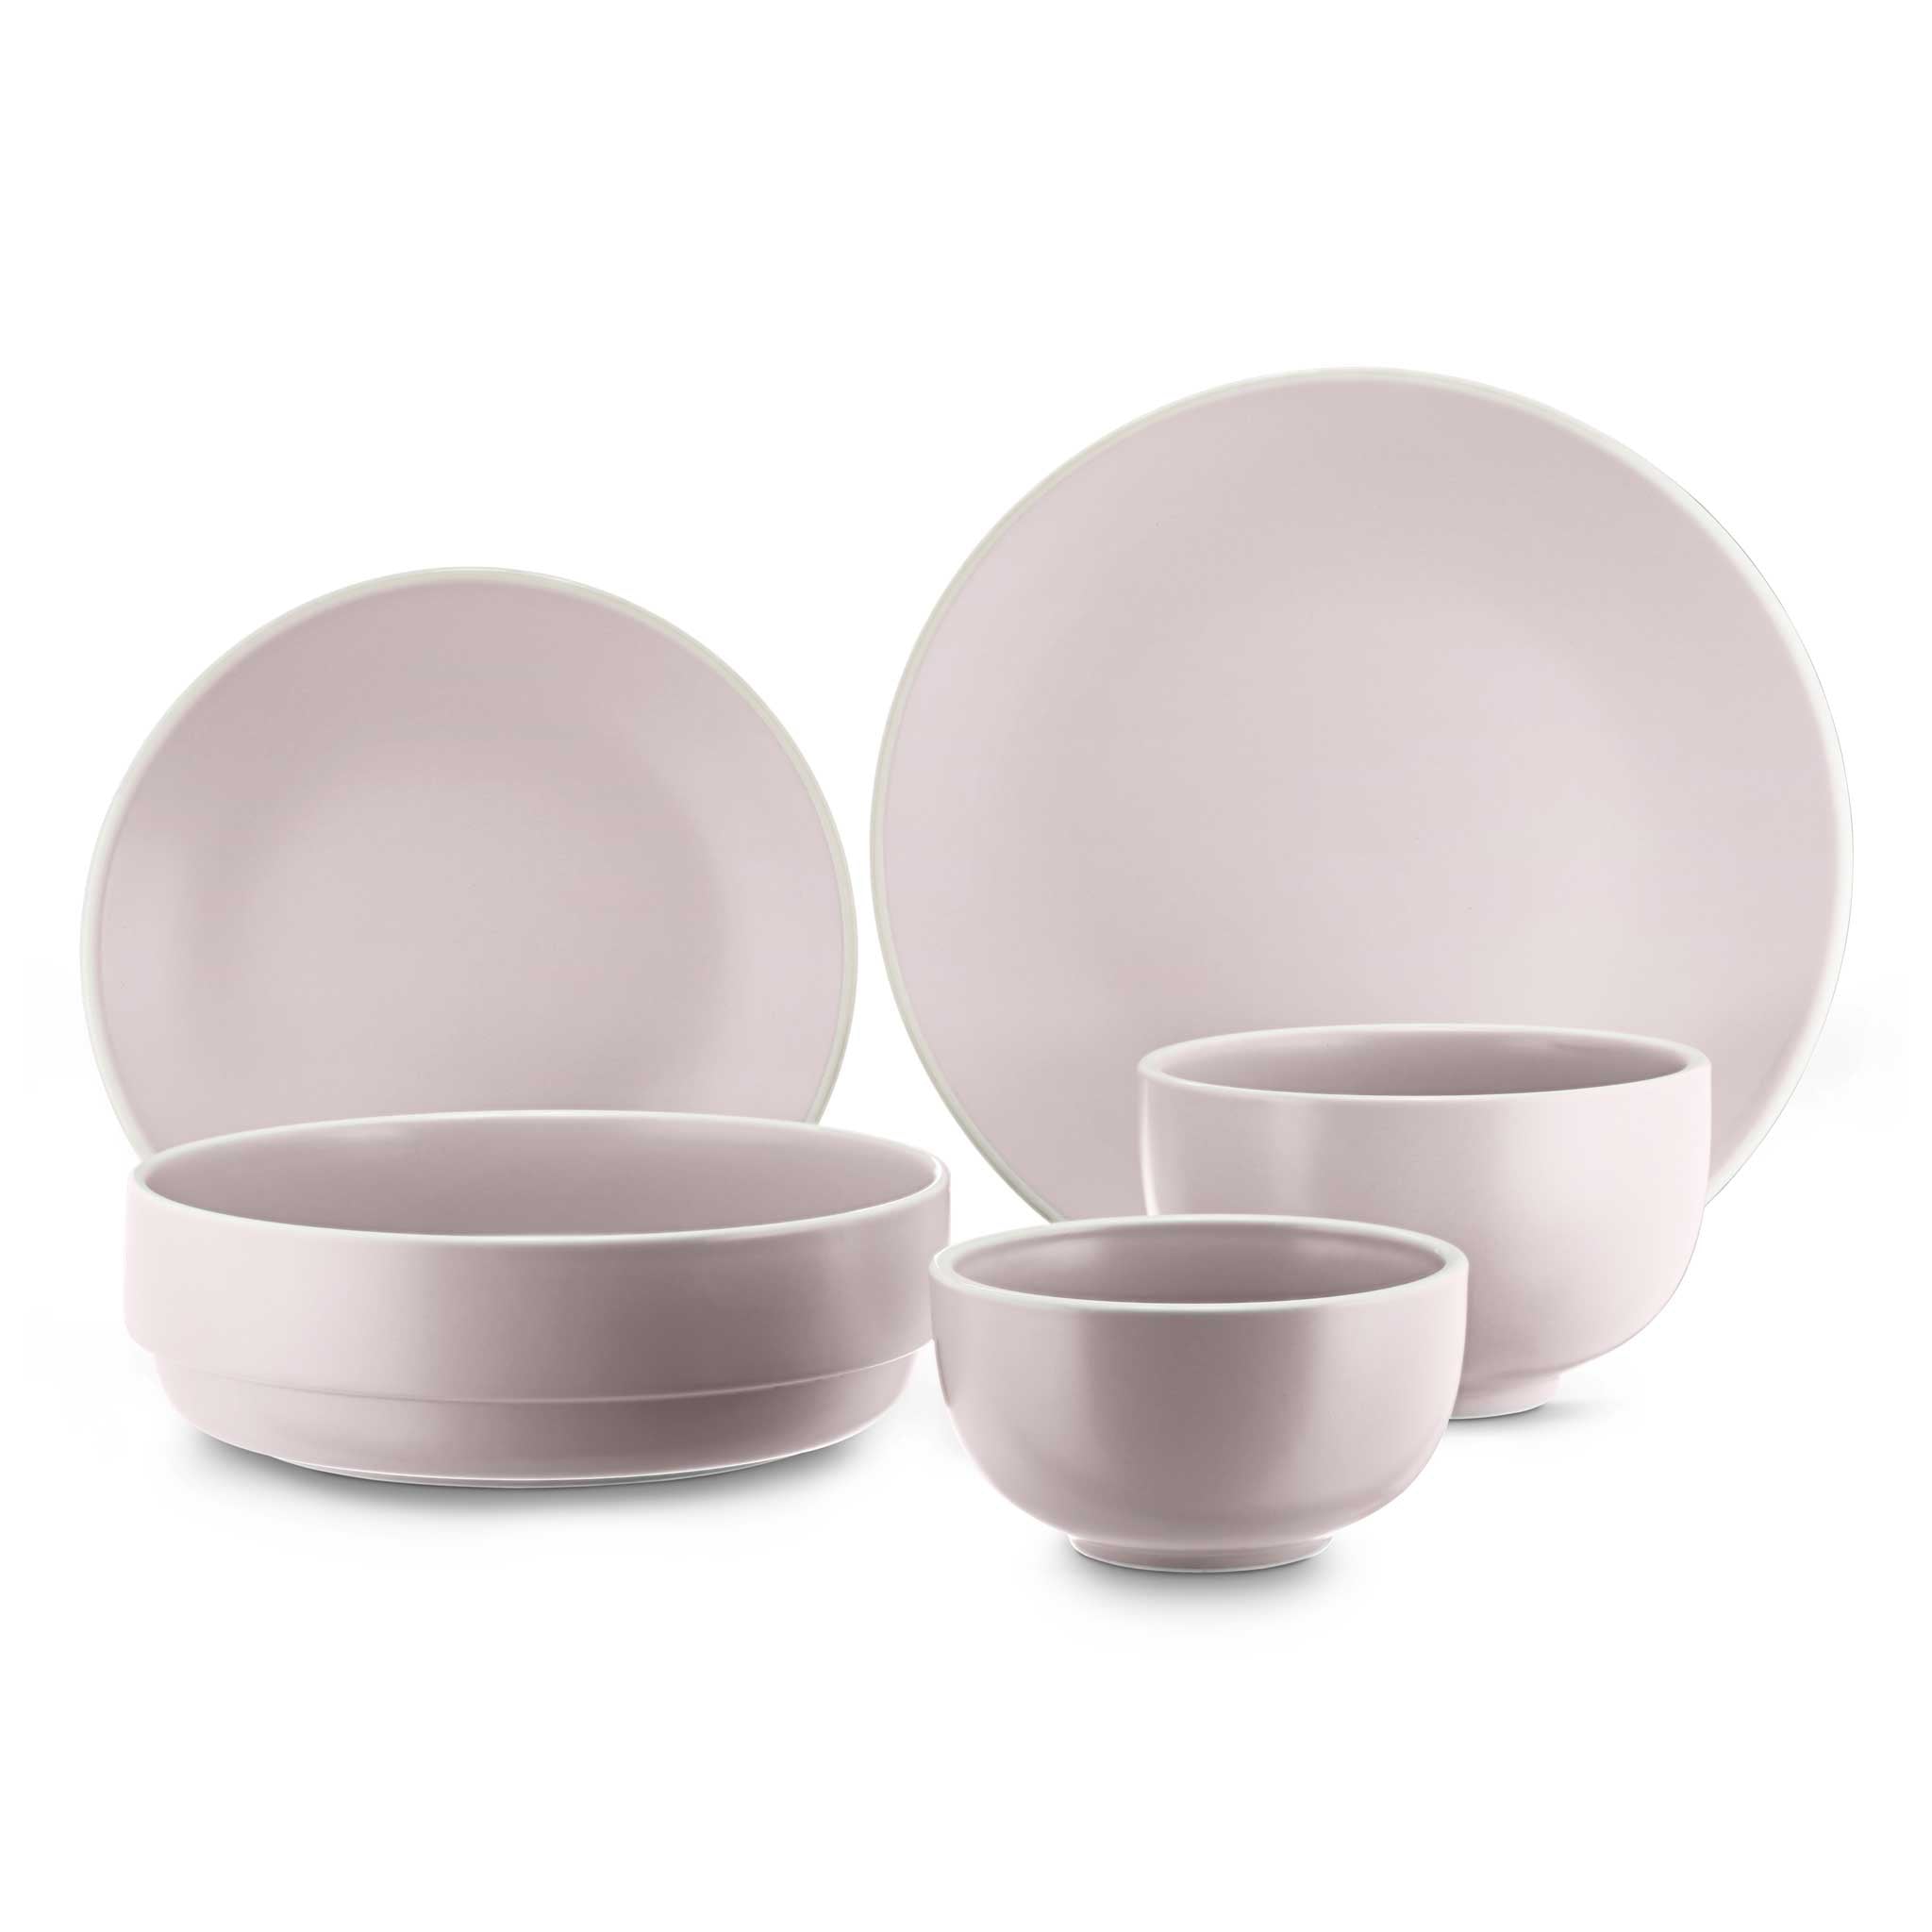 Stoneware Ceramic Dinnerware set in dusty pink from China Blue